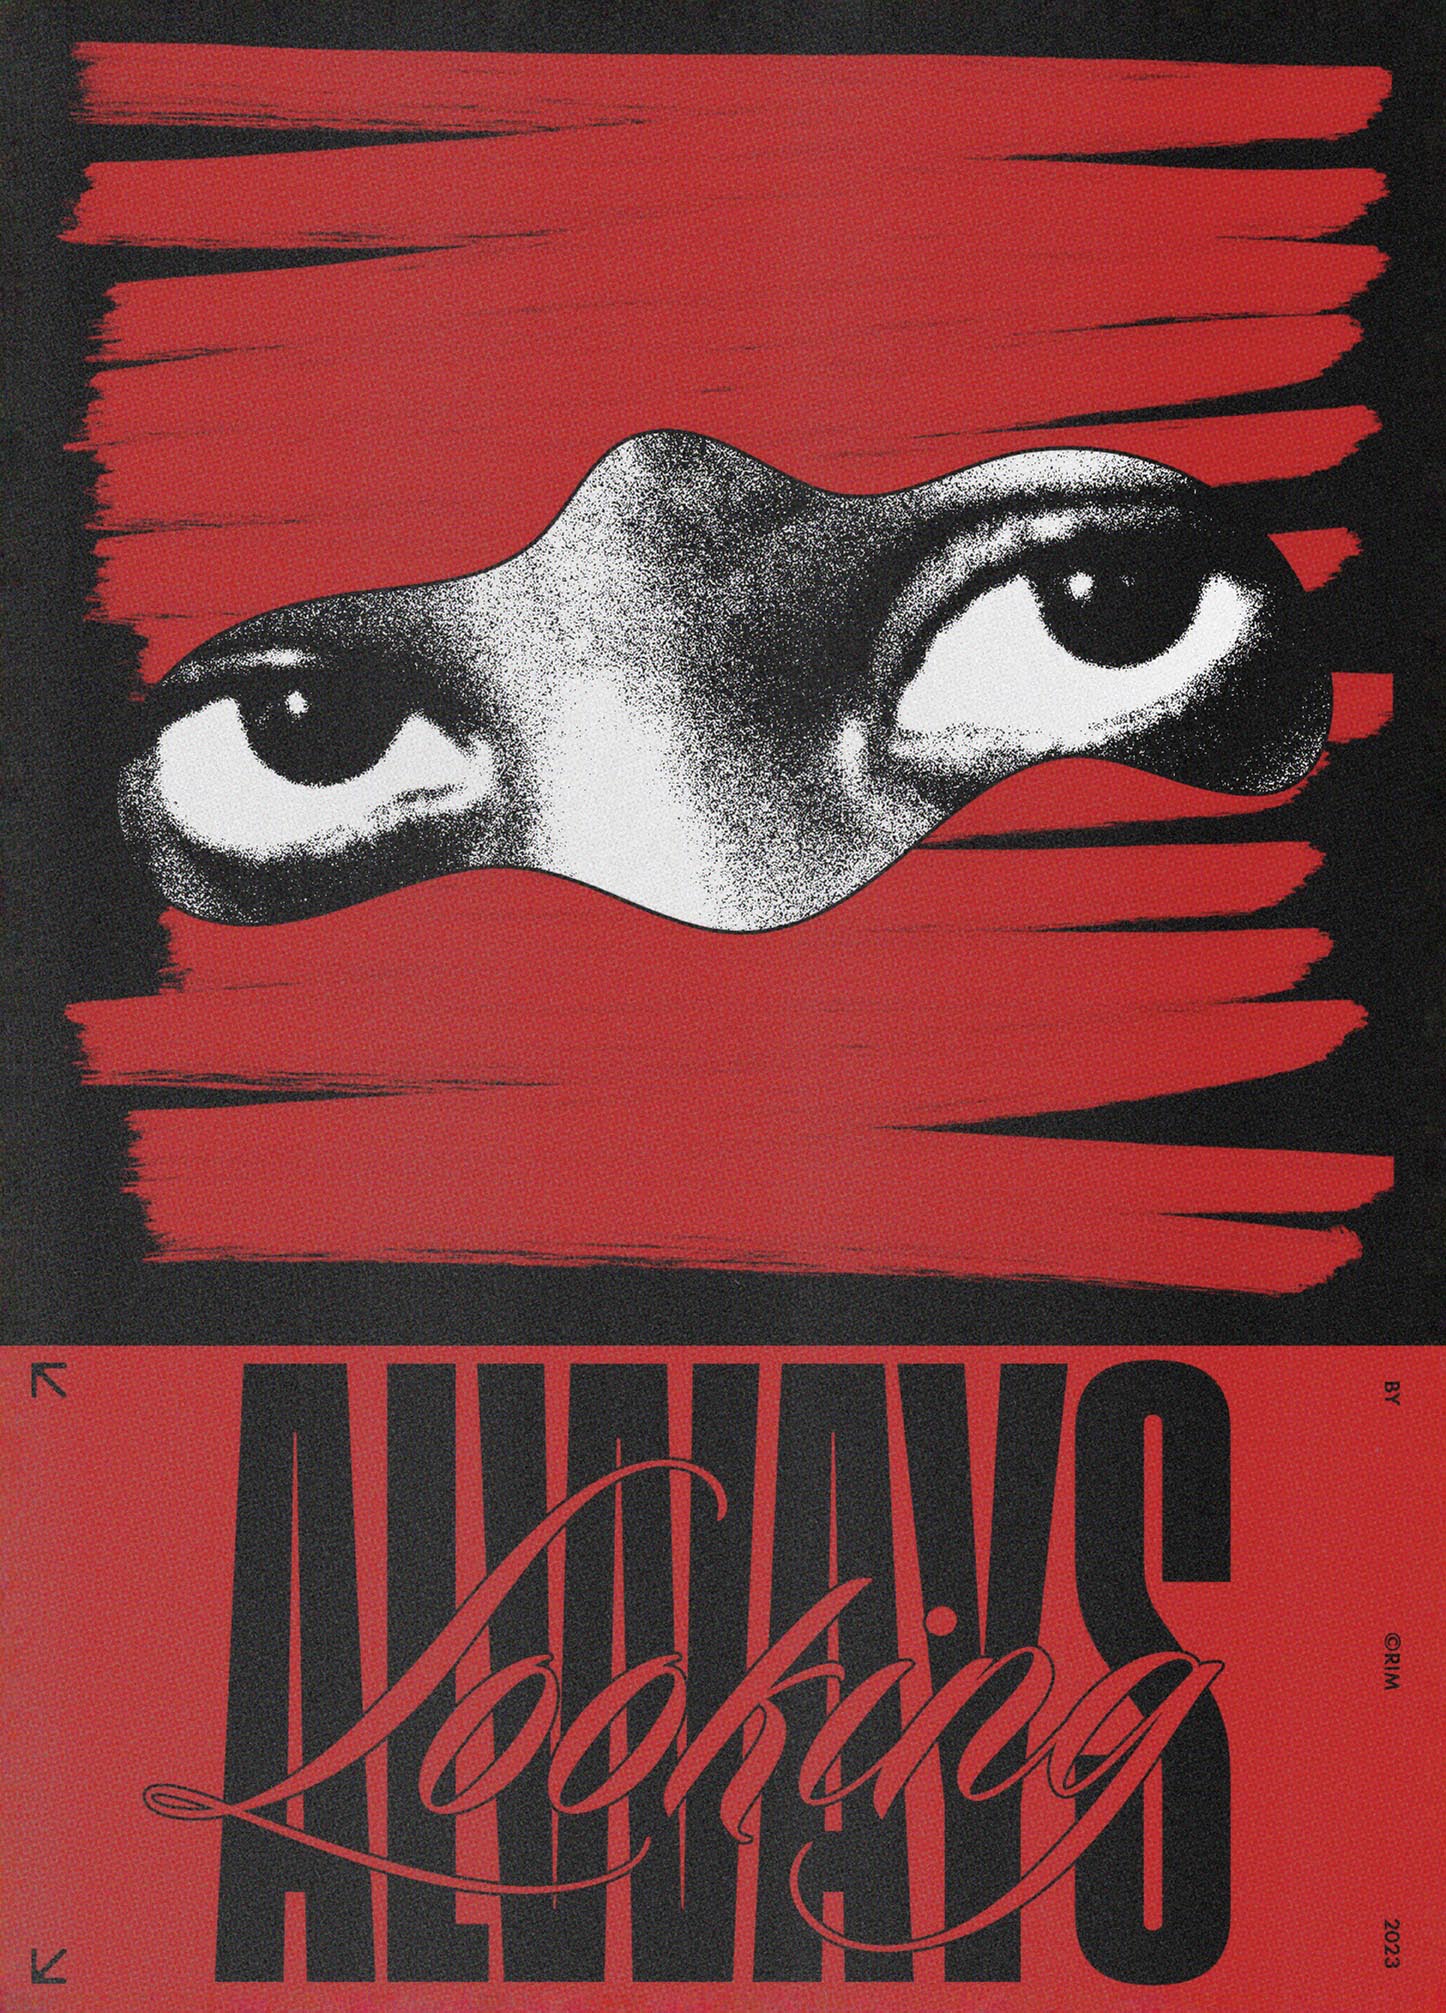 a red poster with a black and white image of an eye